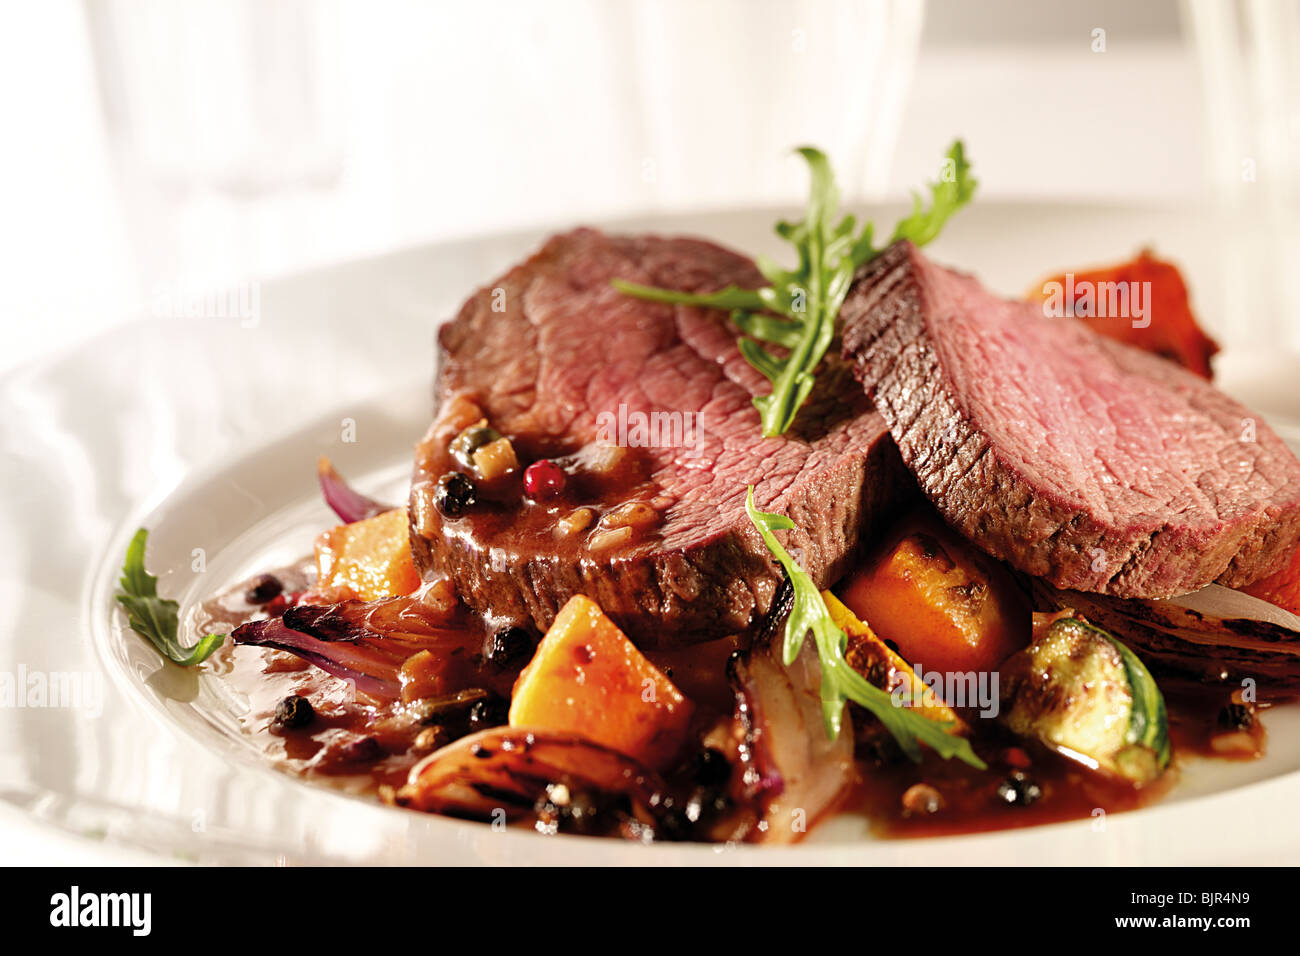 steak and wine pepper sauce food photos and images Stock Photo